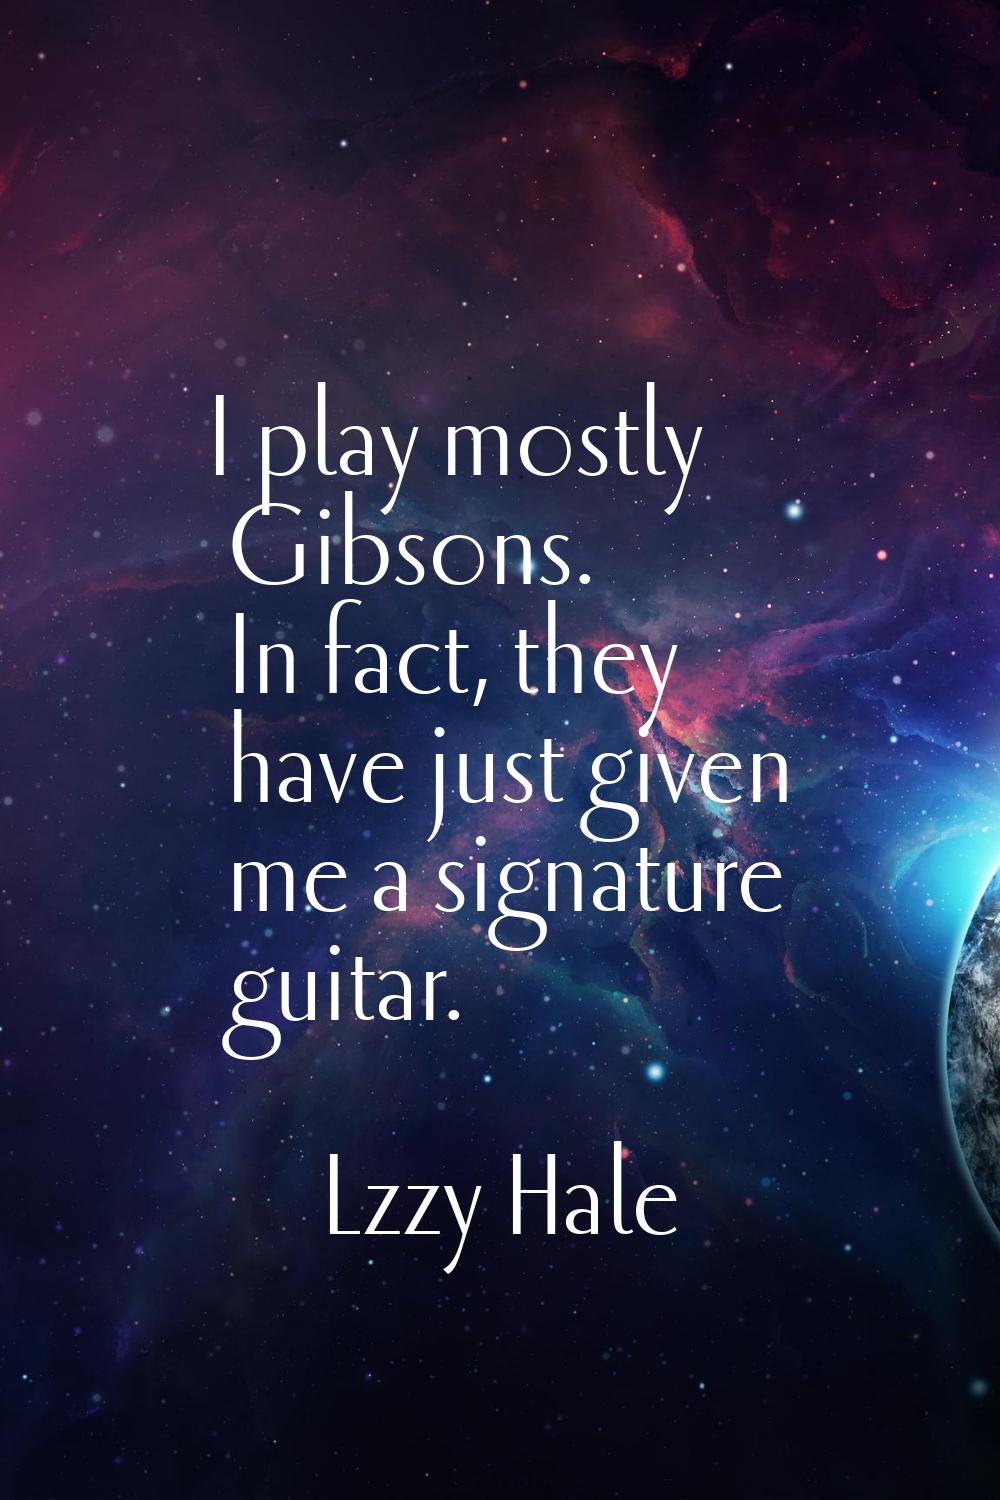 I play mostly Gibsons. In fact, they have just given me a signature guitar.